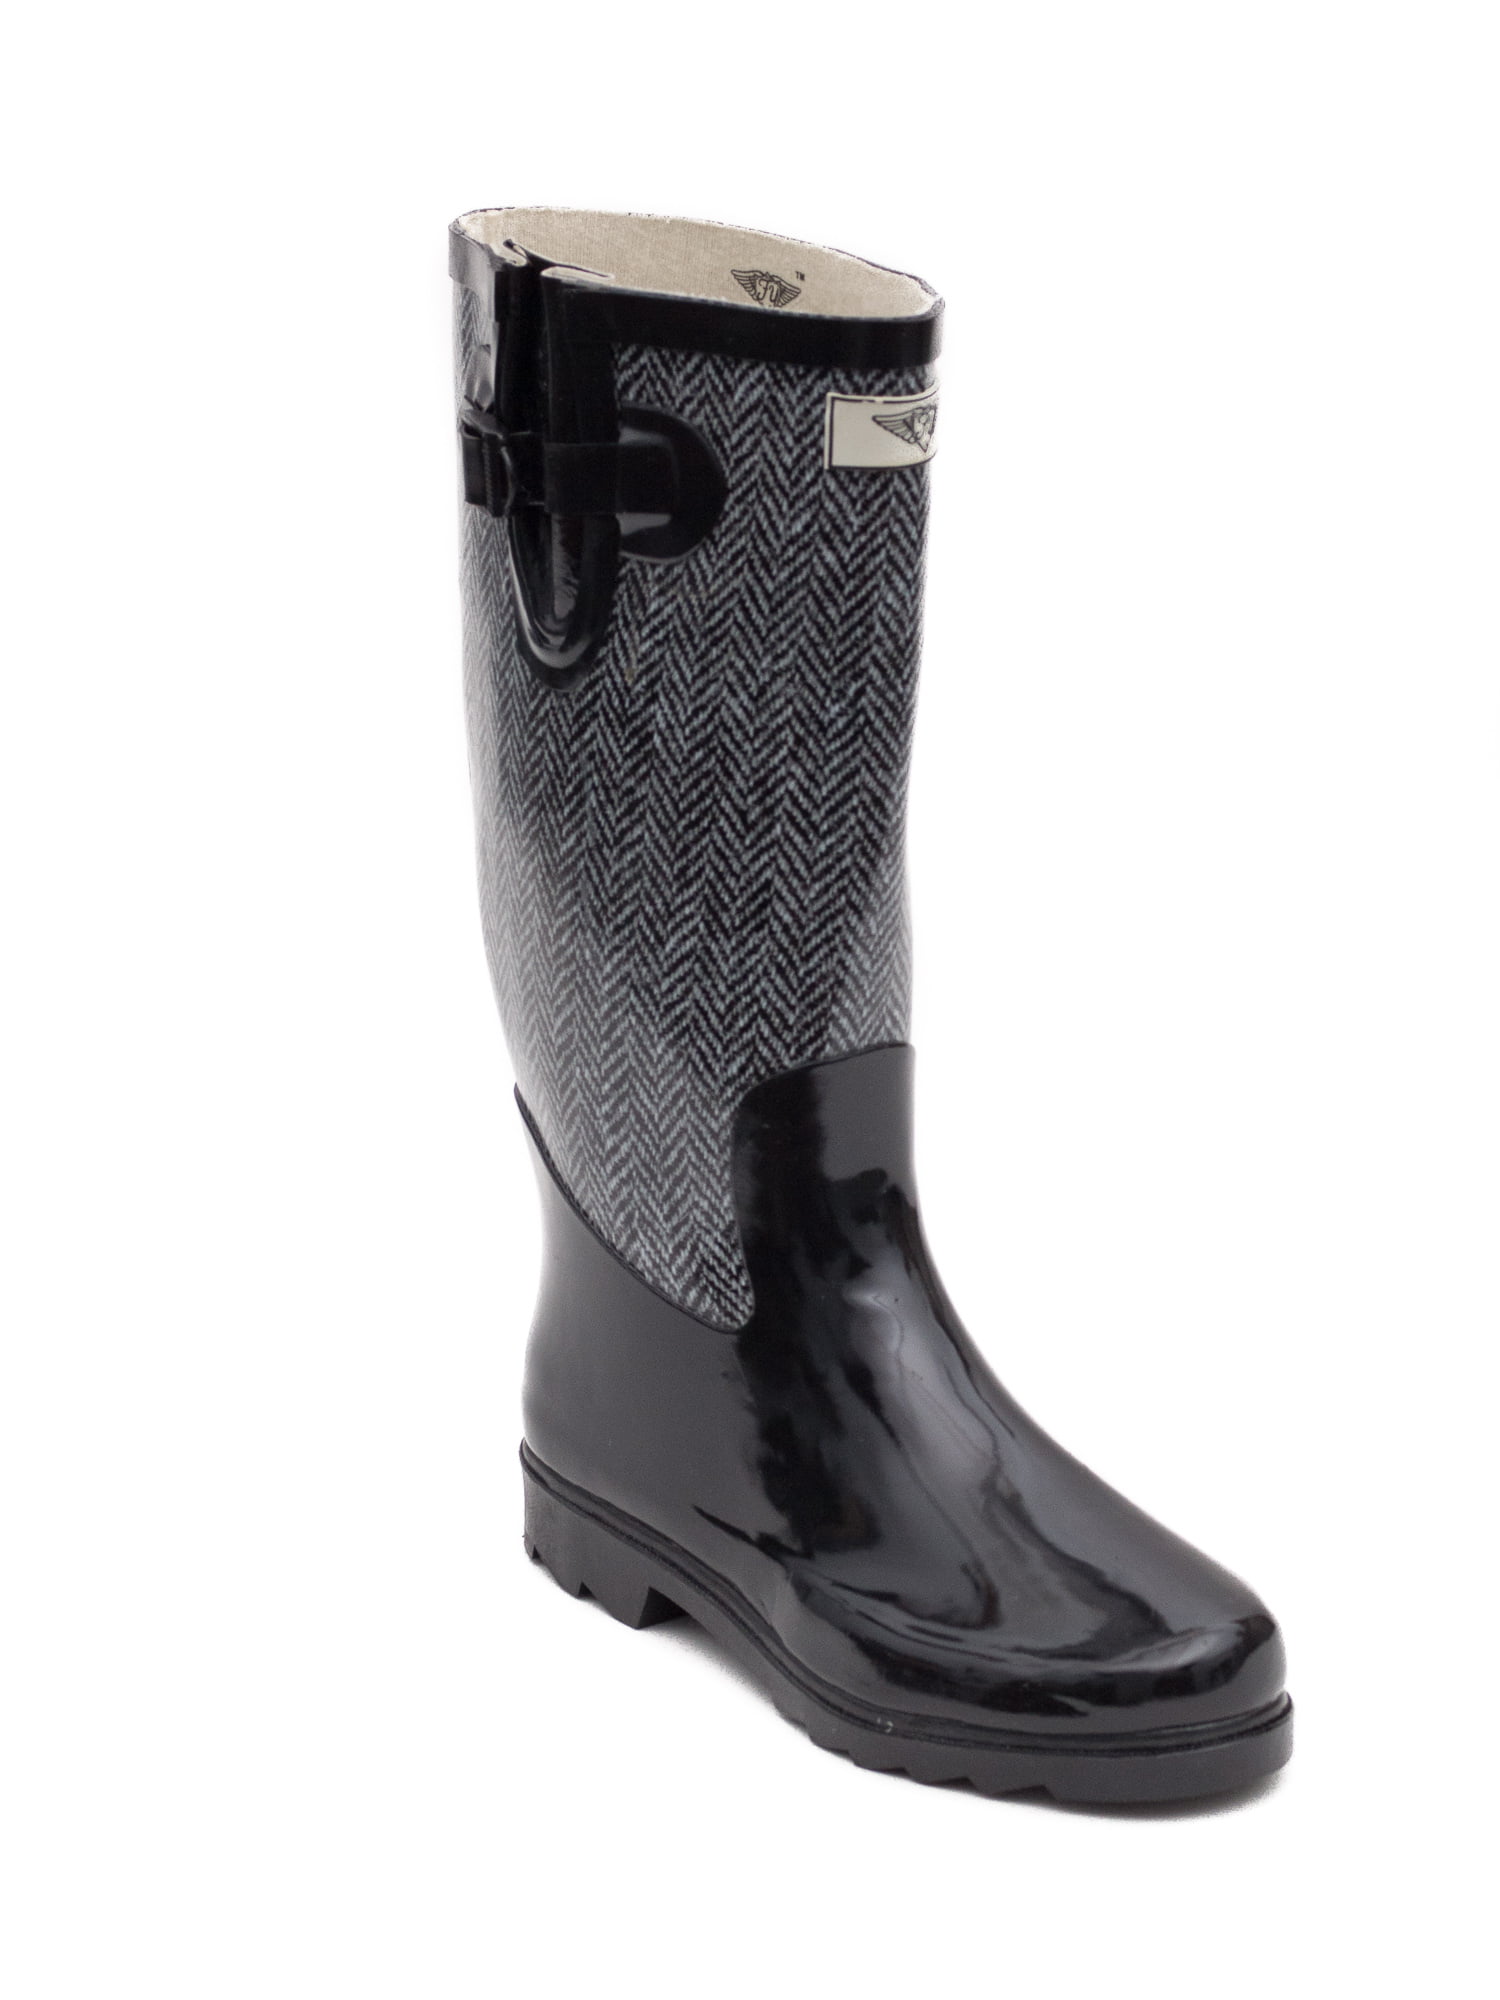 Women Rubber Rain Boots with Cotton 